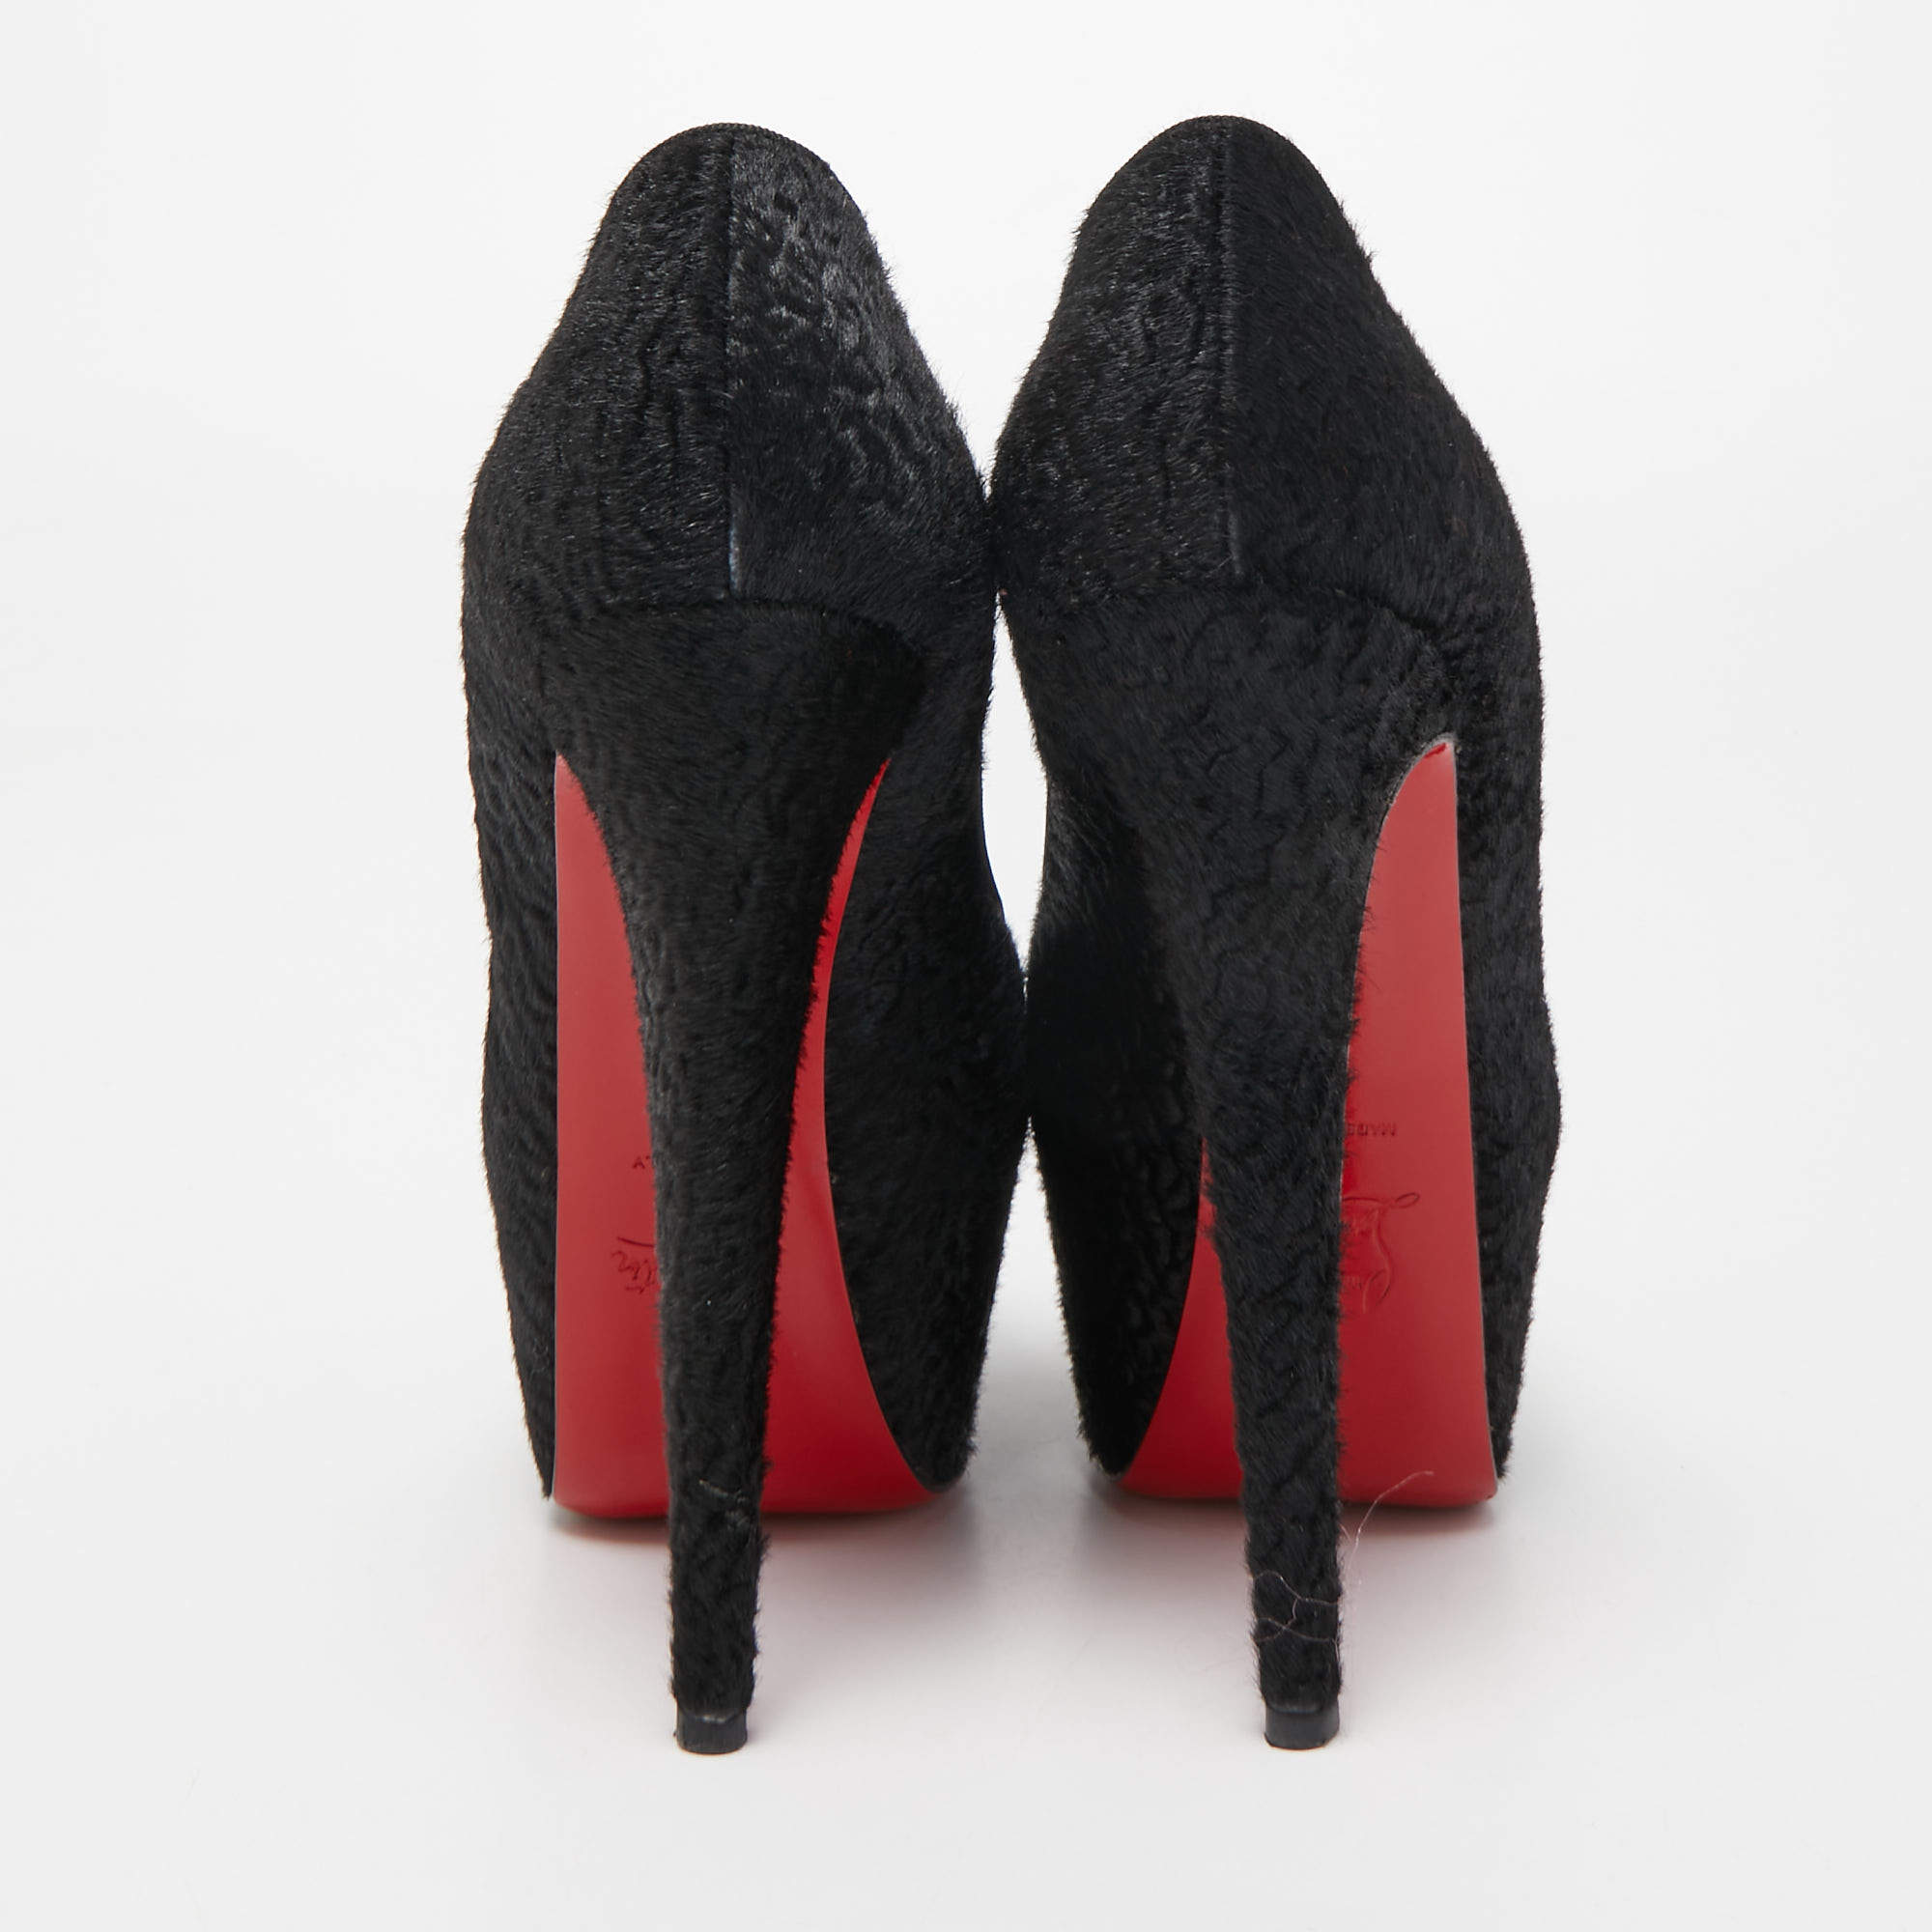 How Much Are Louis Vuitton Black Heels With Red Bottoms